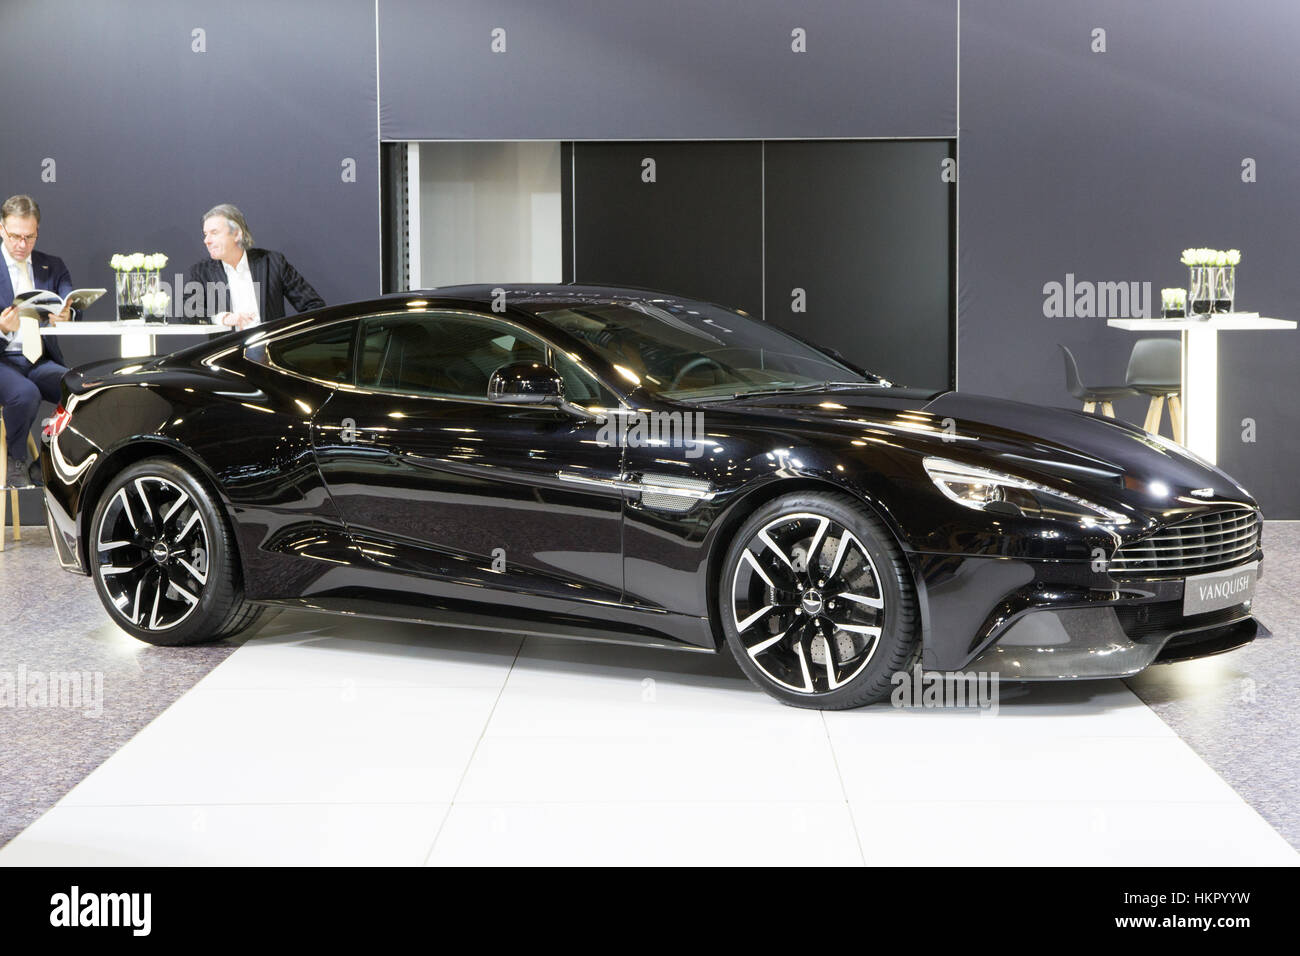 BRUSSELS - JAN 12, 2016: Aston Martin Vanquish on display at the Brussels Motor Show. Stock Photo